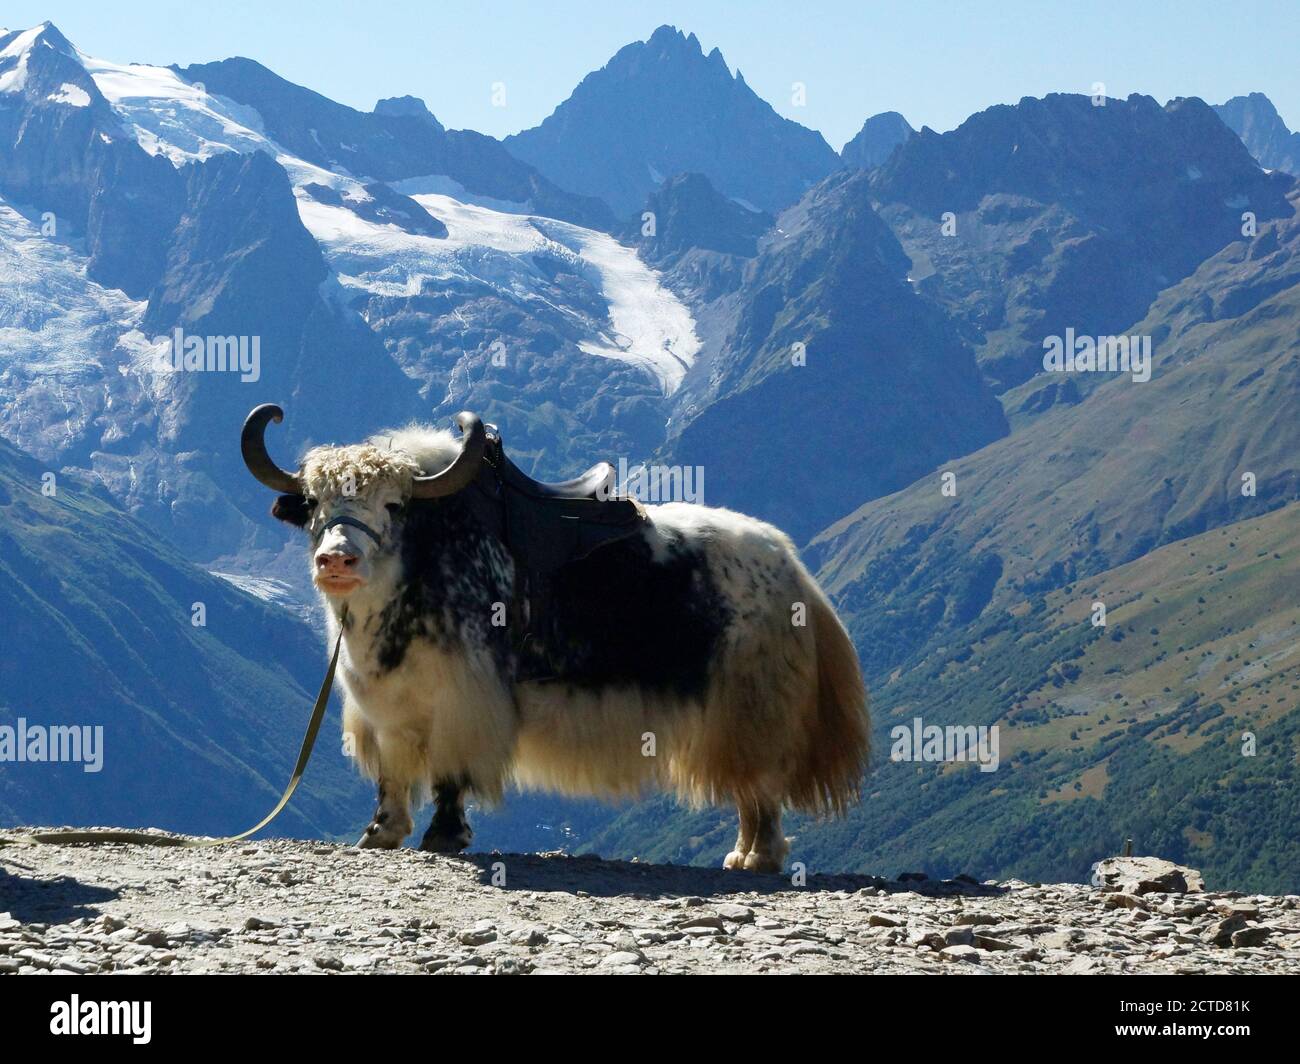 Domestic yak (Bos grunniens). Mountains in Dombay. Caucasus Mountains in the Karachay-Cherkess Republic, Teberda Nature Reserve, Russia. Stock Photo